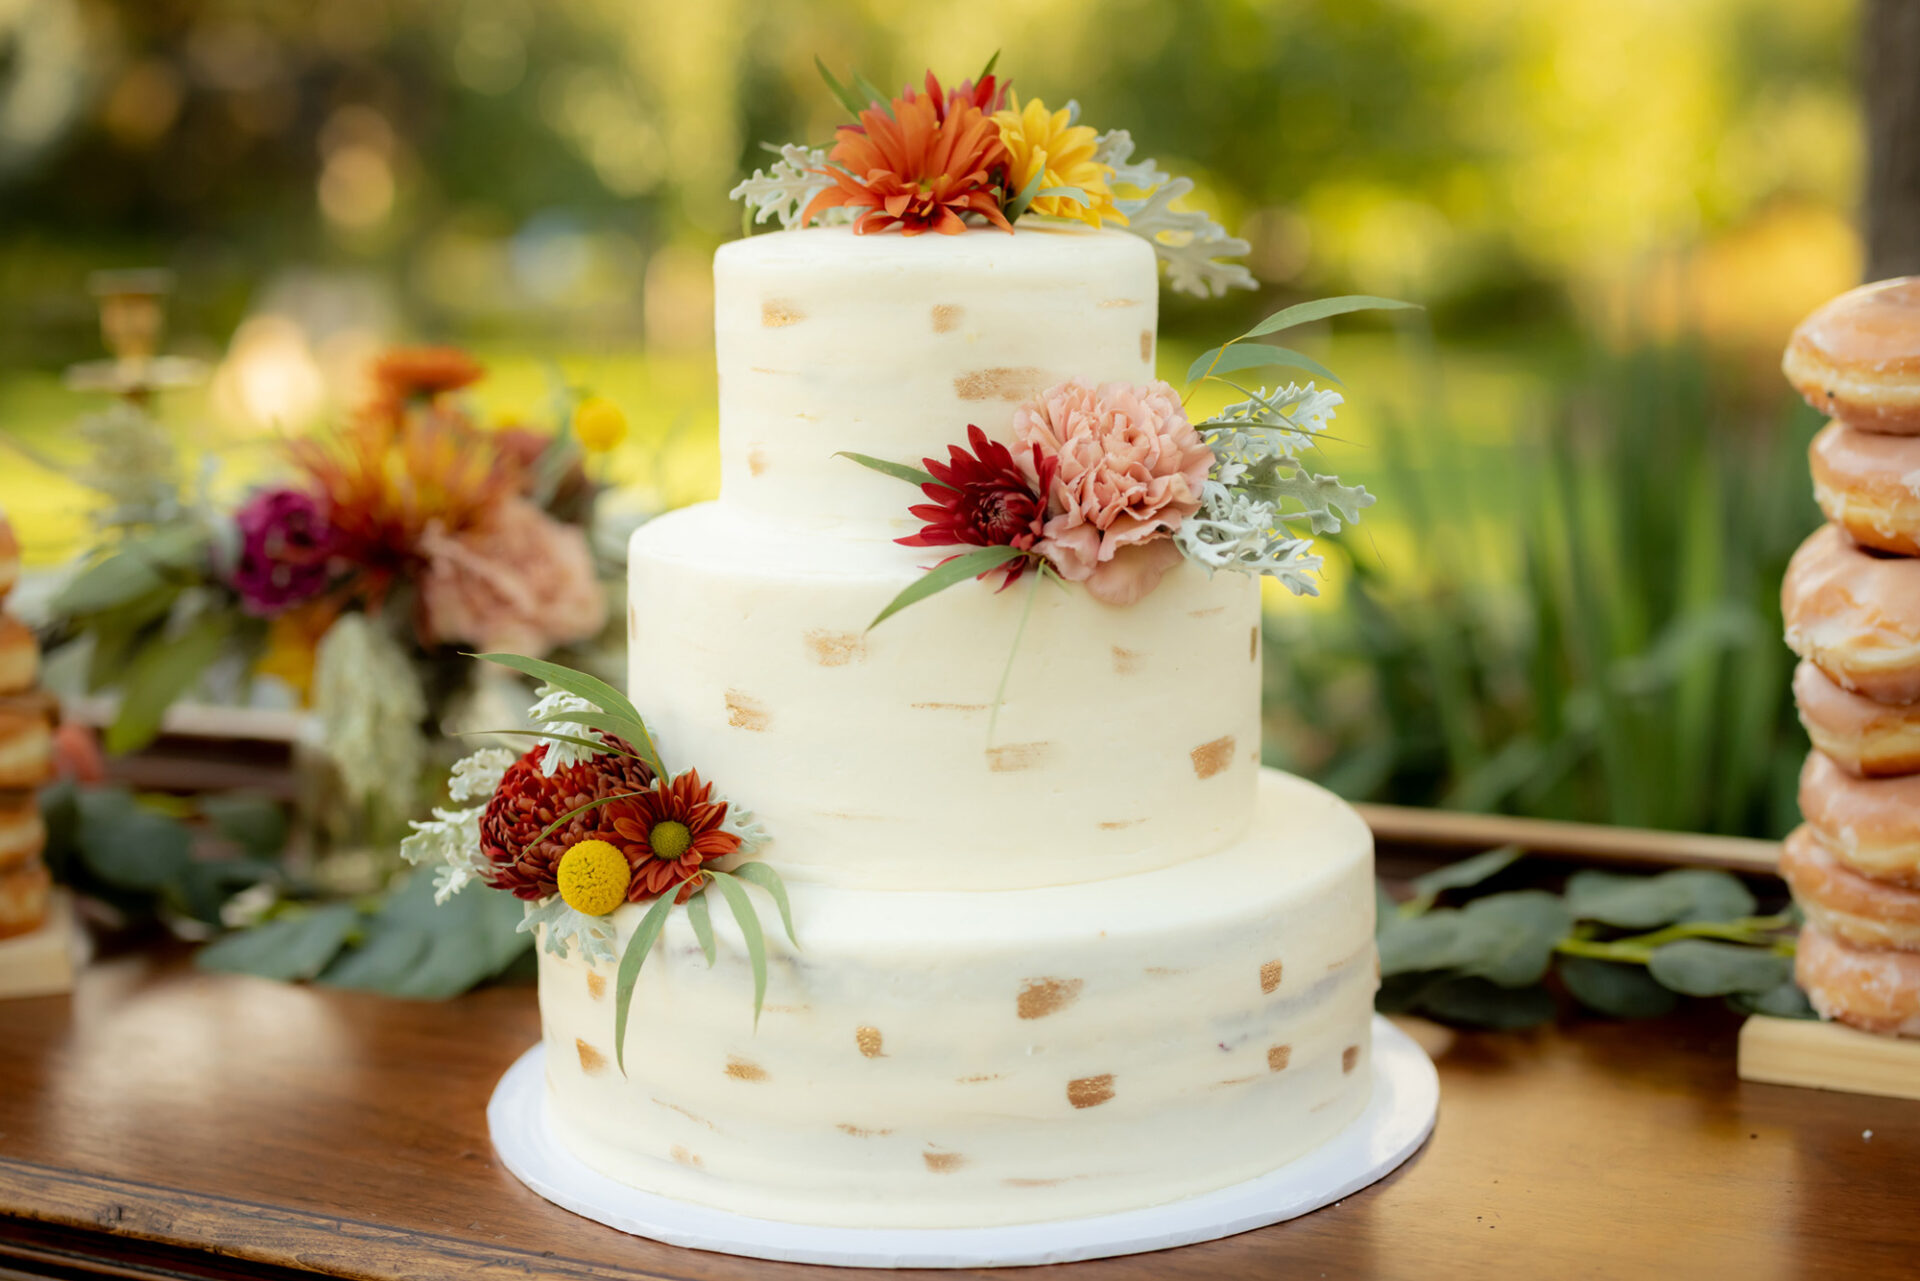 A beautiful floral-themed wedding cake